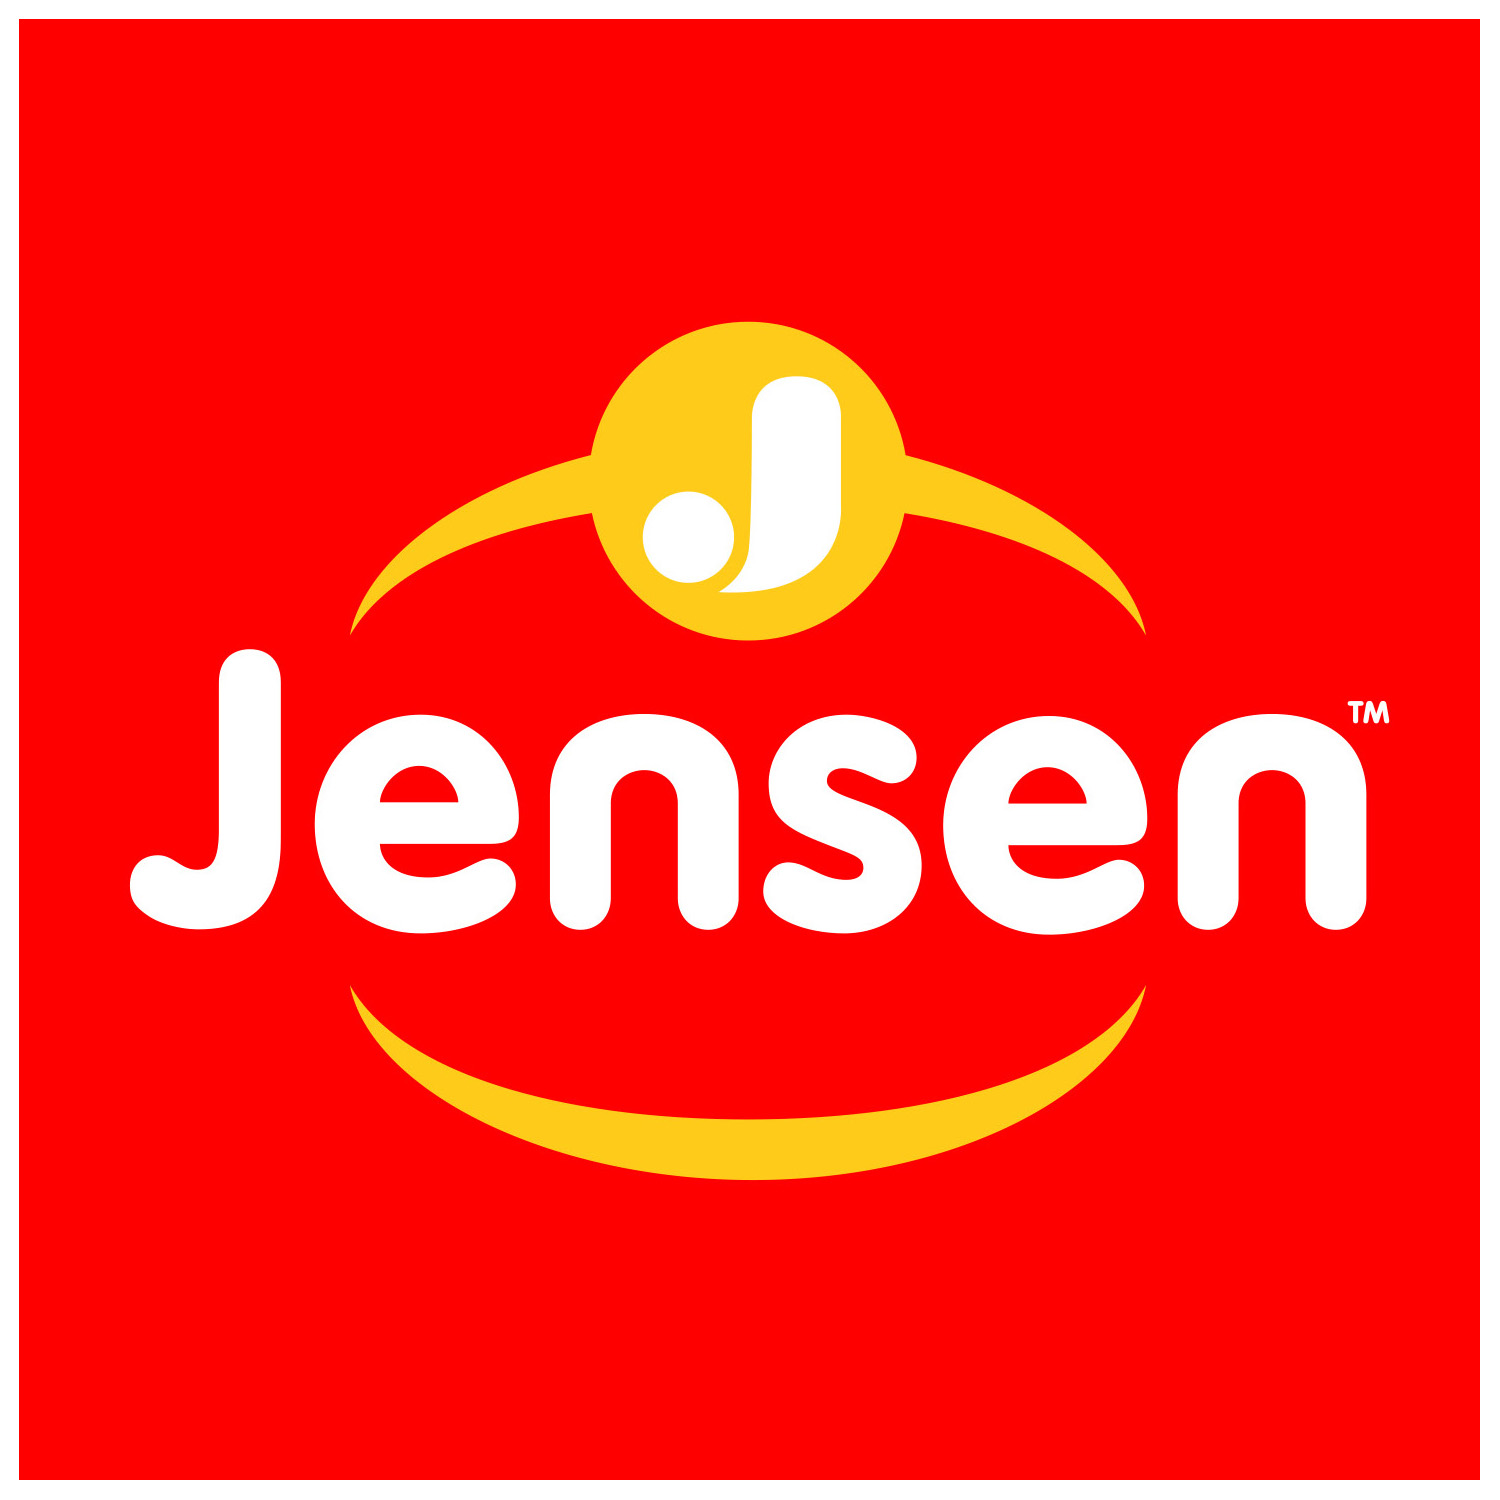 Jensen Meat Invests $9 Million And Leads New Job Creation